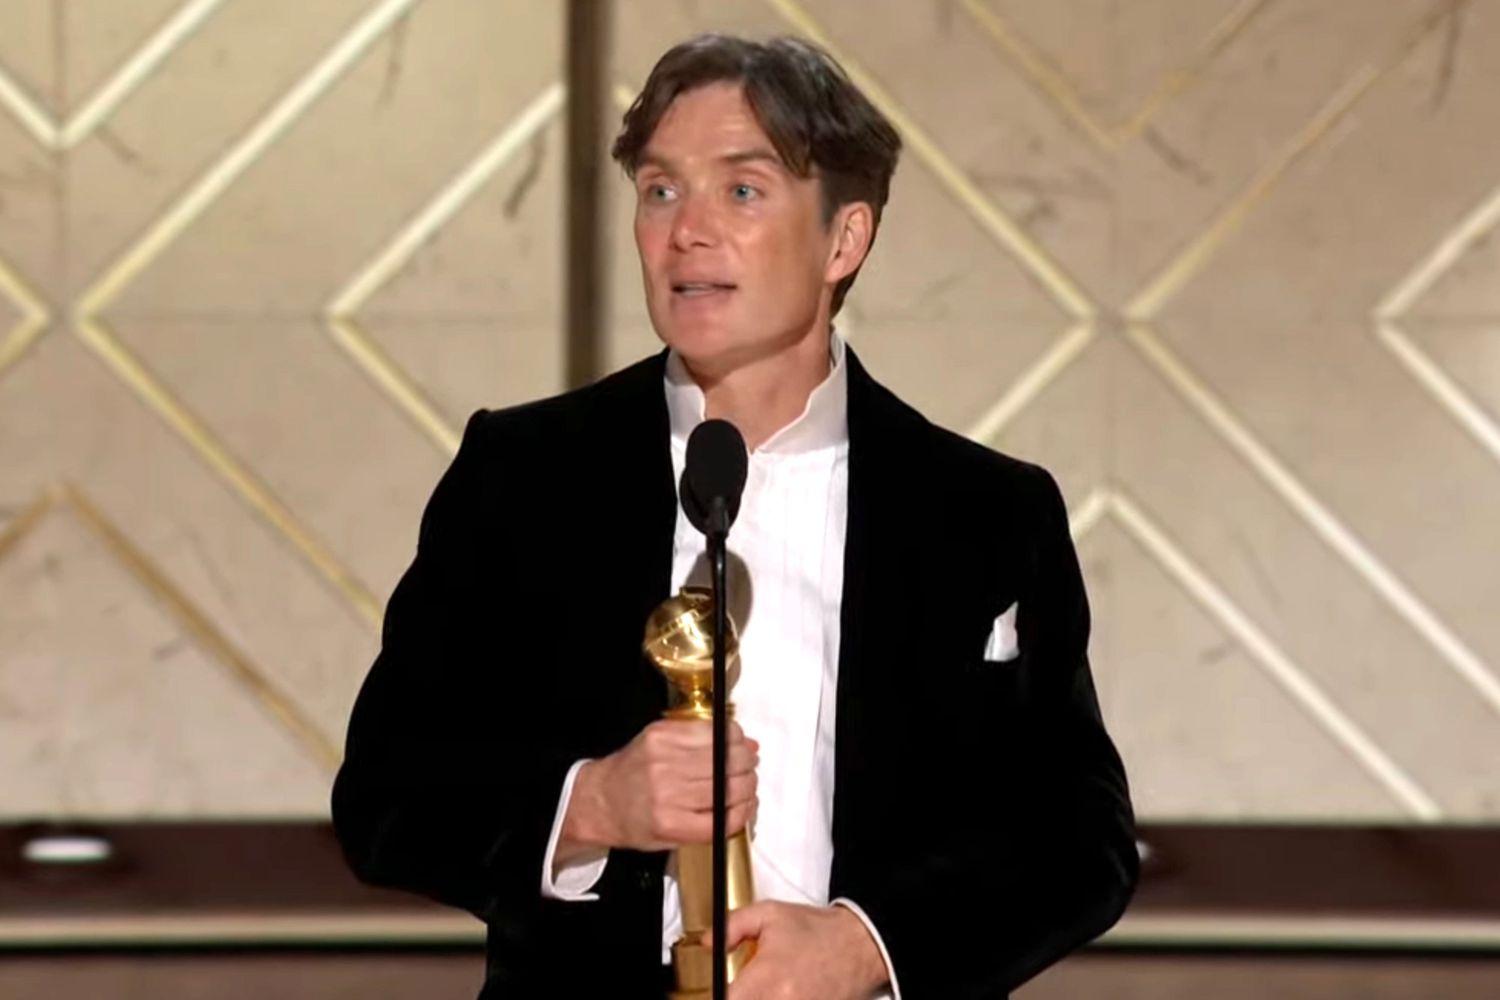 Cillian Murphy made an adorable joke upon receiving his award about his wife's lipstick still being on his nose. The clip went viral with netizens calling th actor 'loverboy'